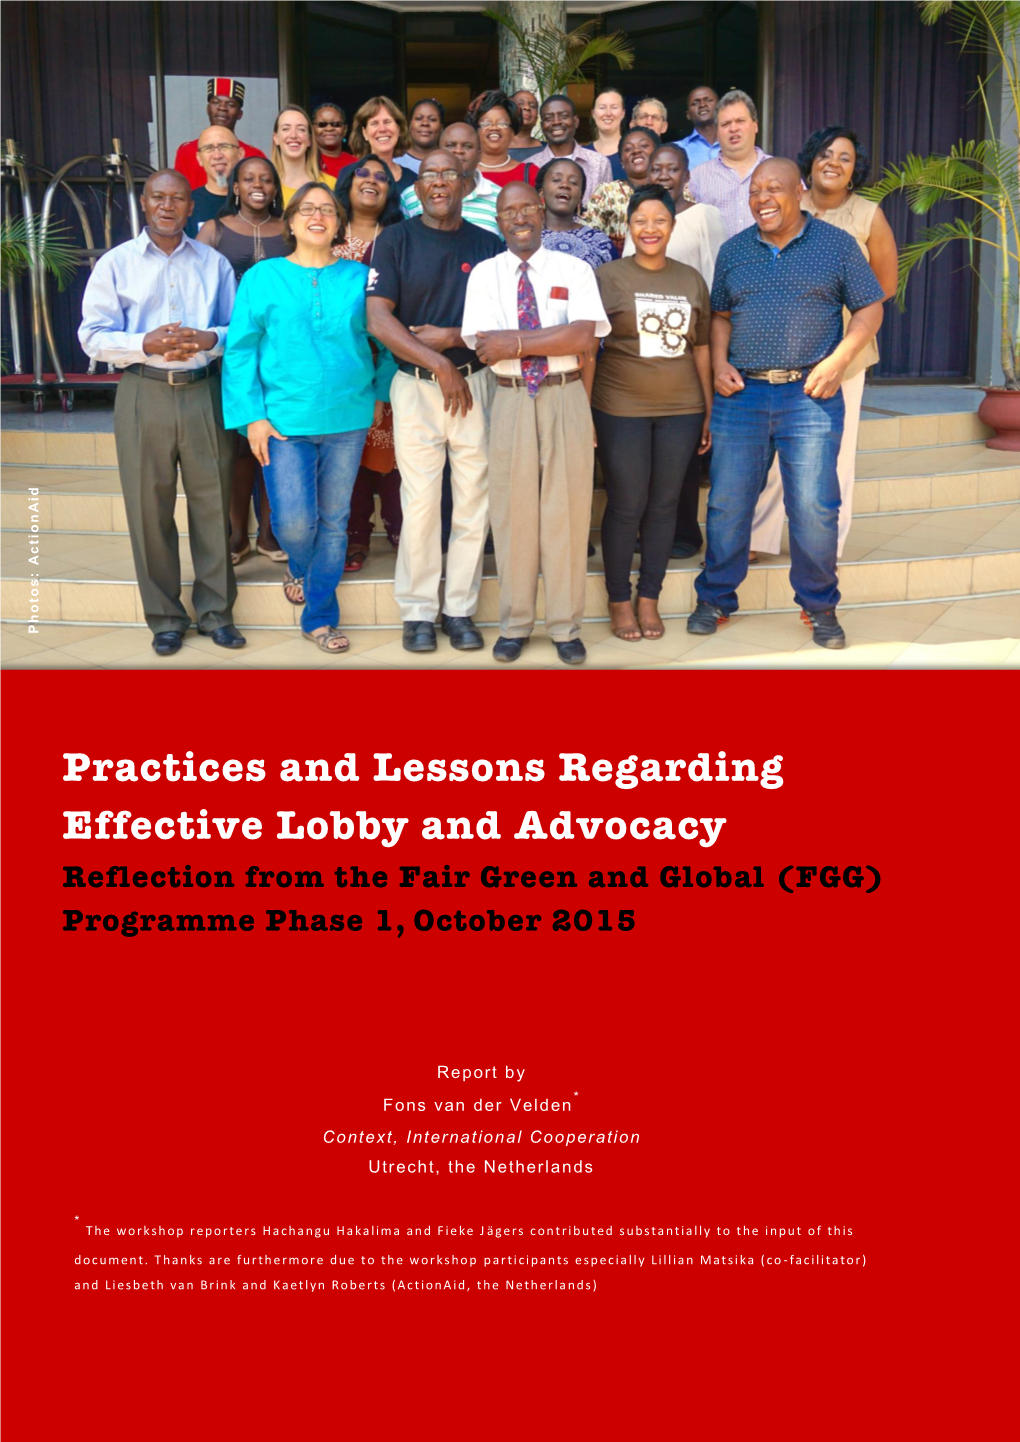 Practices and Lessons Regarding Effective Lobby and Advocacy 1 FGG Alliance 2011 – 2015